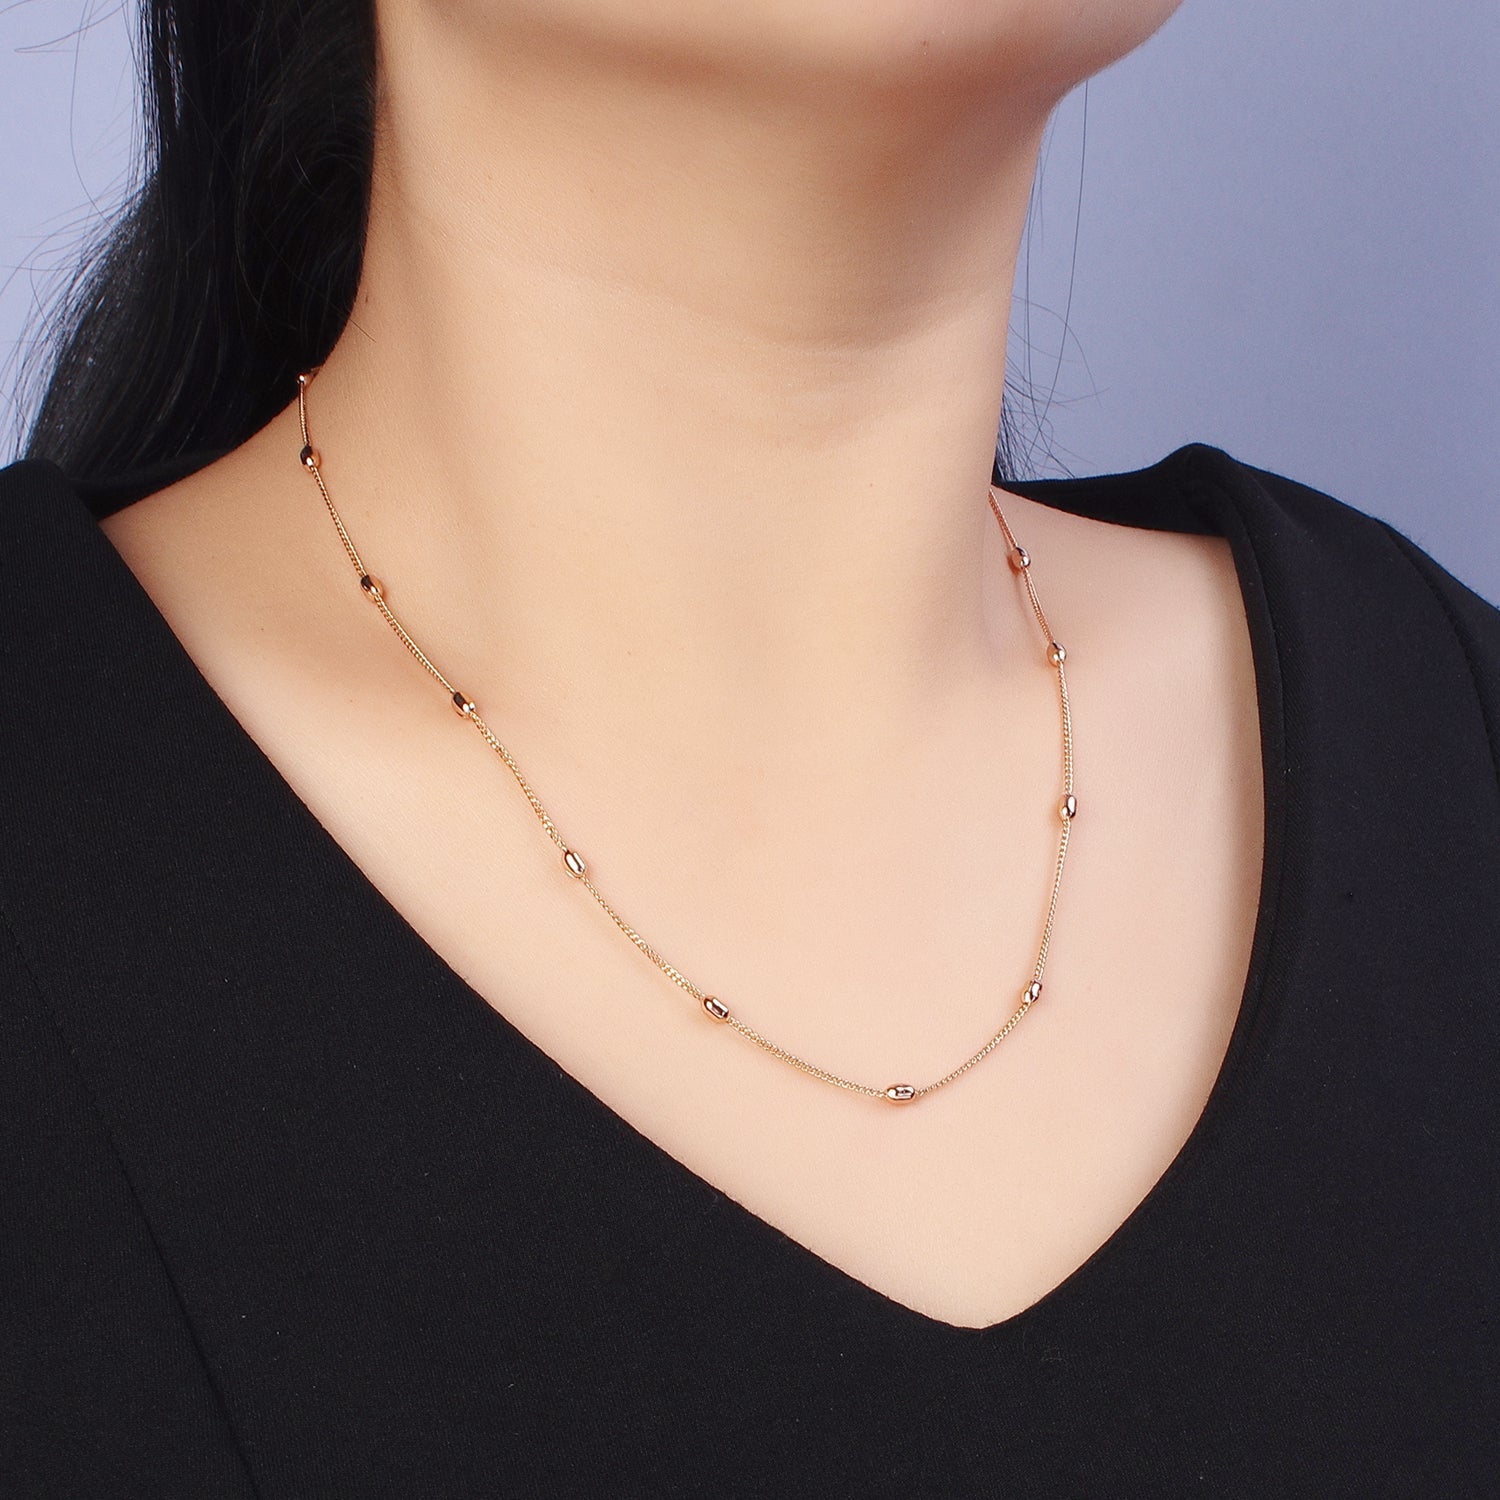 19.75 Inch Satellite Chain 18K Gold Filled Dainty Beaded Chain Necklace WA-1602 - DLUXCA